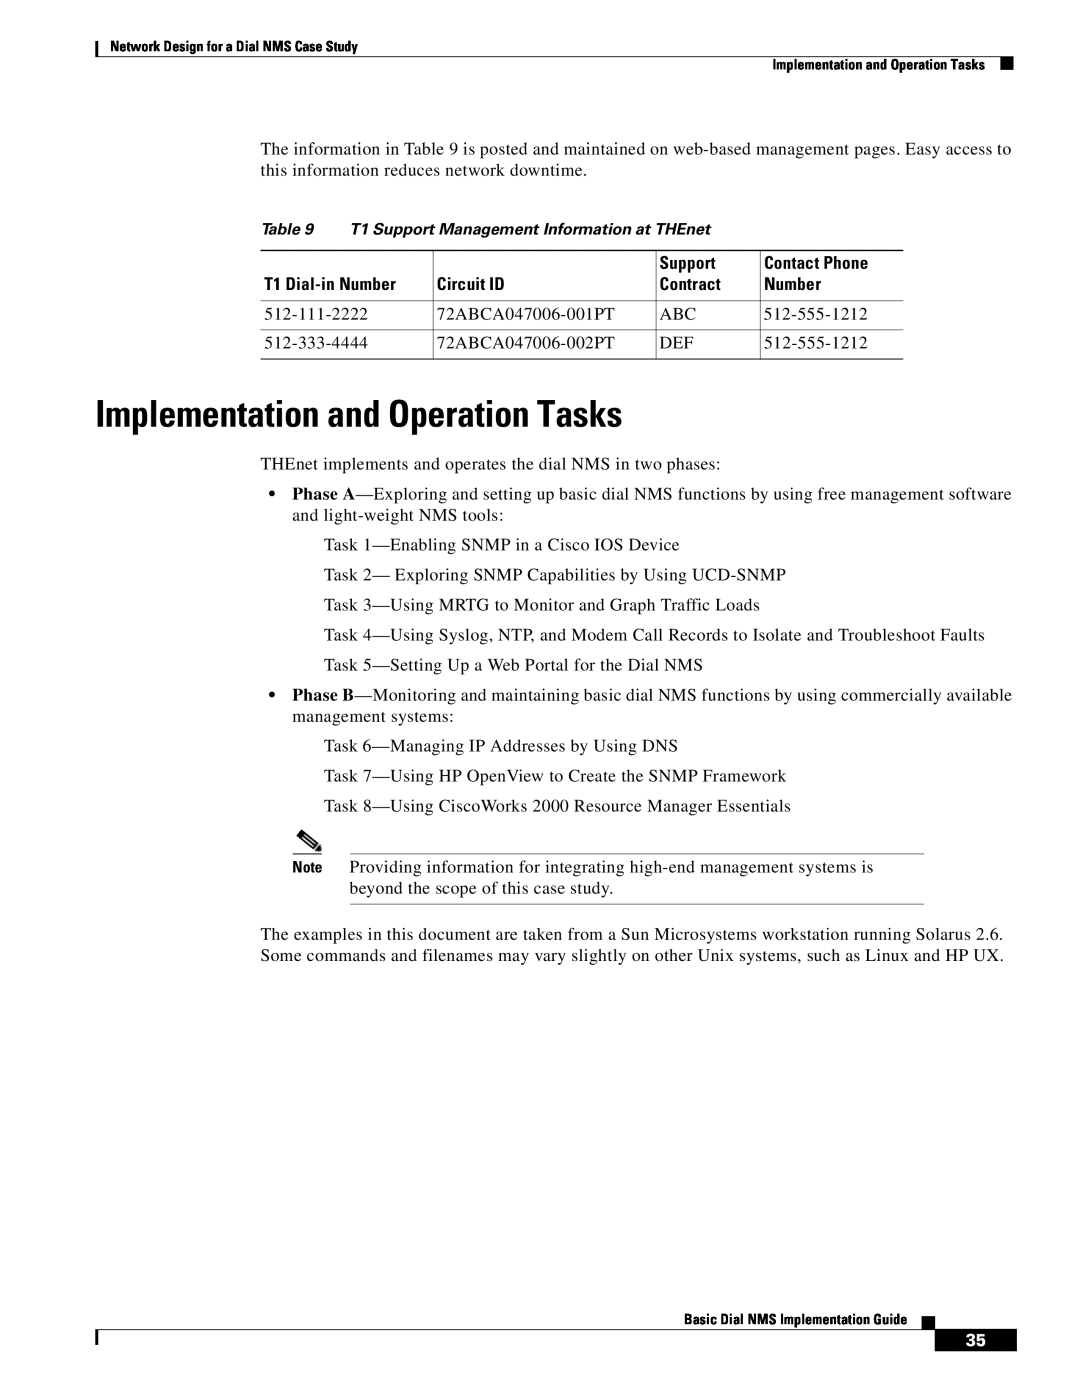 Cisco Systems Dial NMS Implementation and Operation Tasks, Support, Contact Phone, T1 Dial-in Number, Circuit ID, Contract 